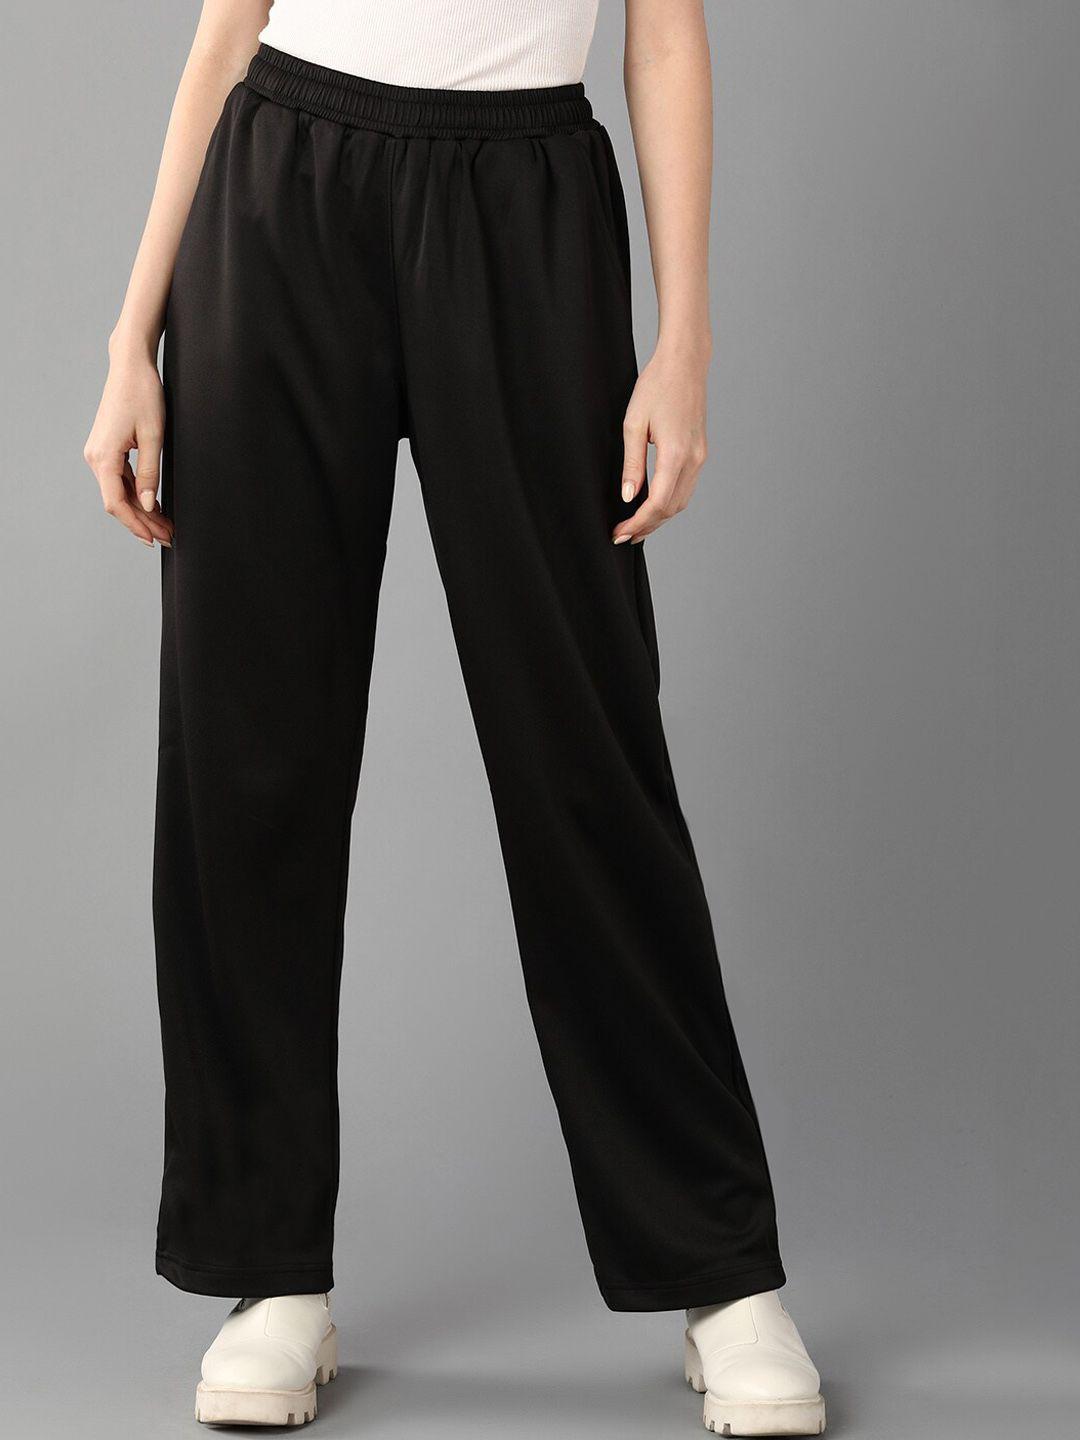 roadster-black-women-straight-fit-high-rise-track-pants